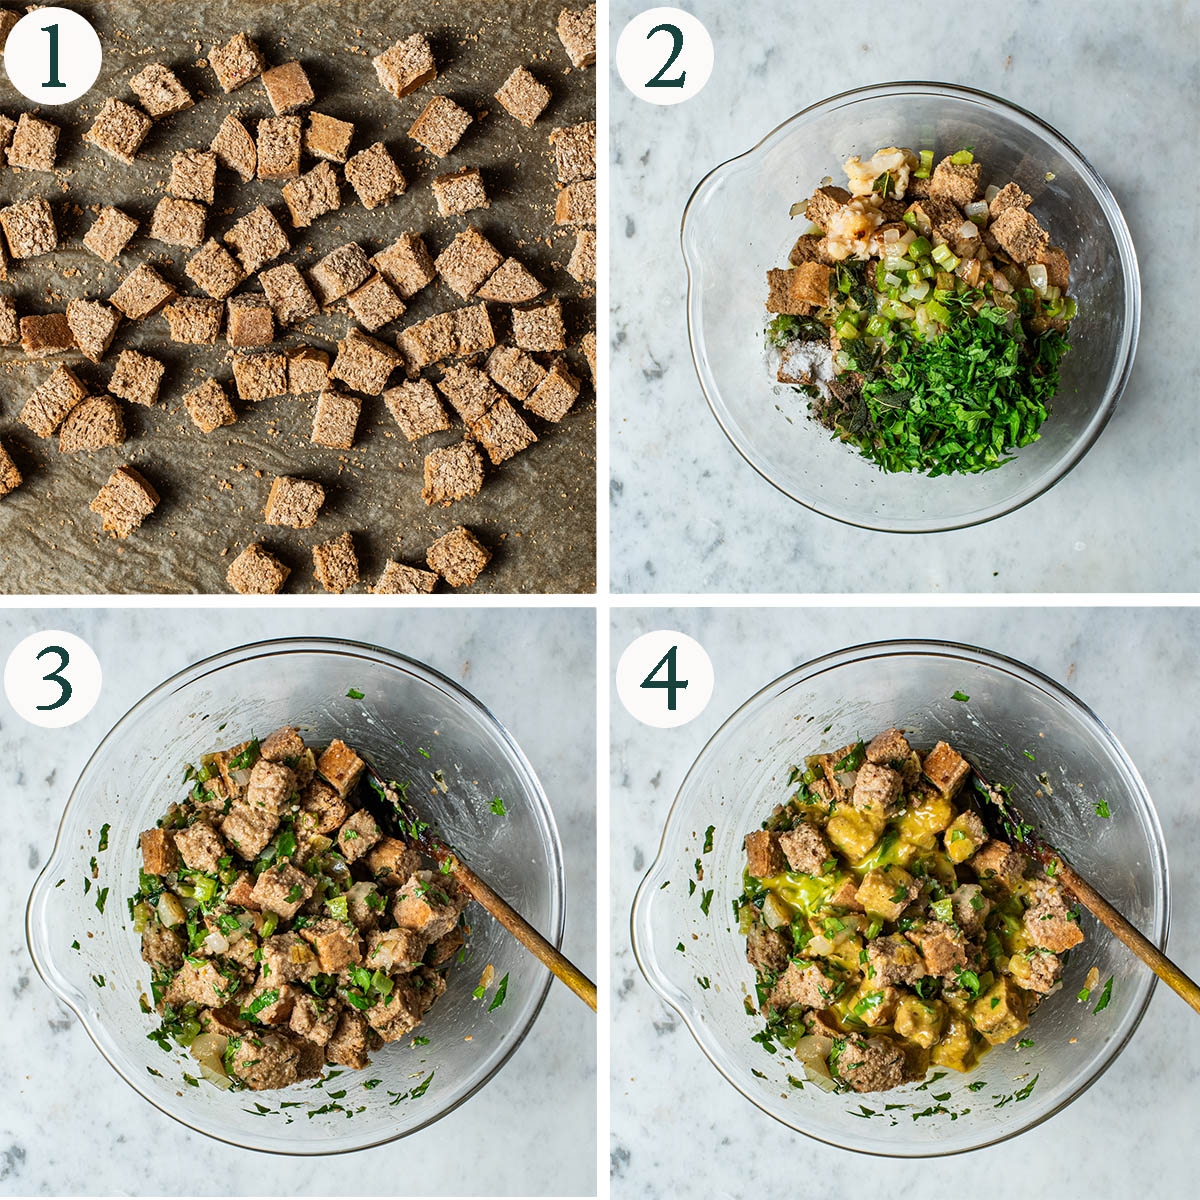 Steps 1 to 4 for stuffing, toasting bread and mixing stuffing ingredients.